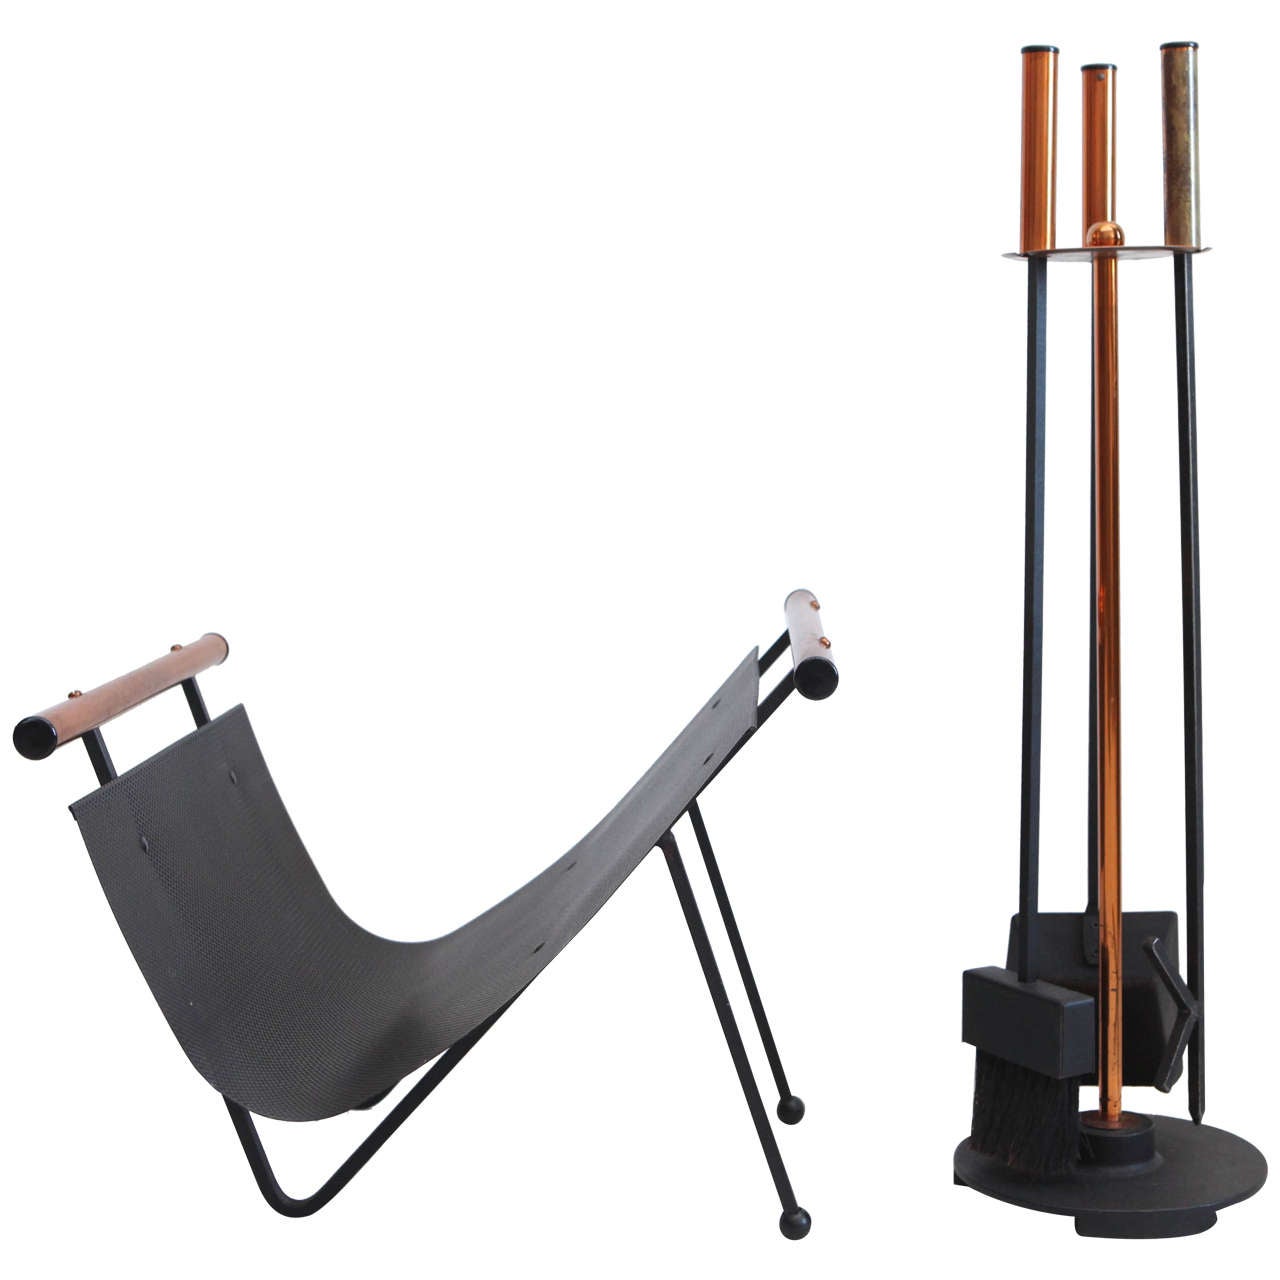 View this item and discover similar fireplace tools and chimney pots for sale at 1stdibs - Modern Art Deco style fireplace tool set and wood rack.  Tool set measures: 9